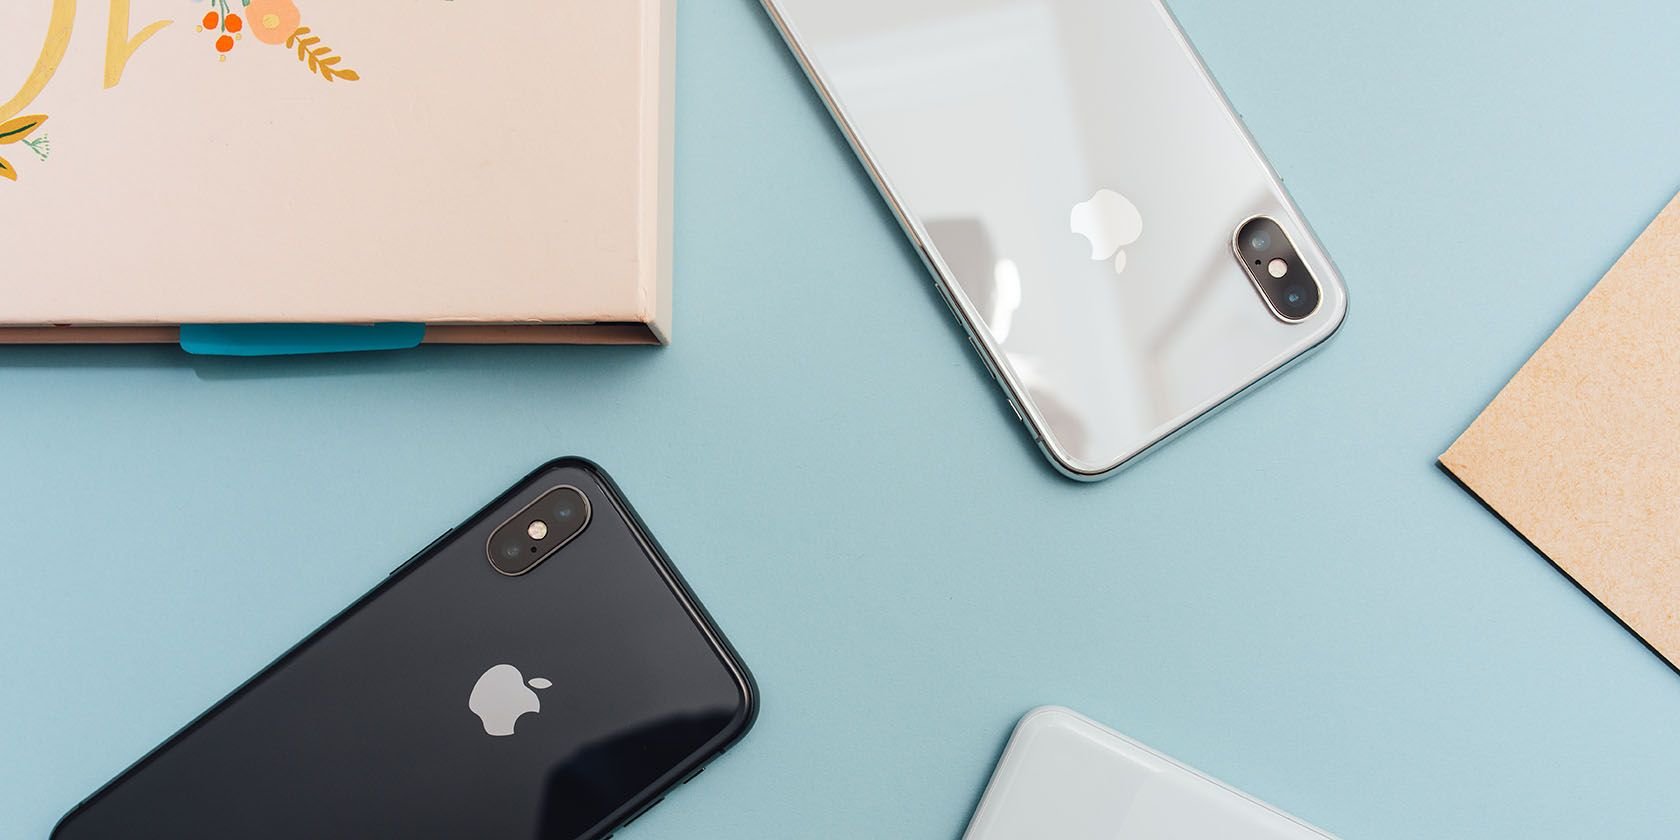 10 Things to Check Before Buying a Second-Hand iPhone Online